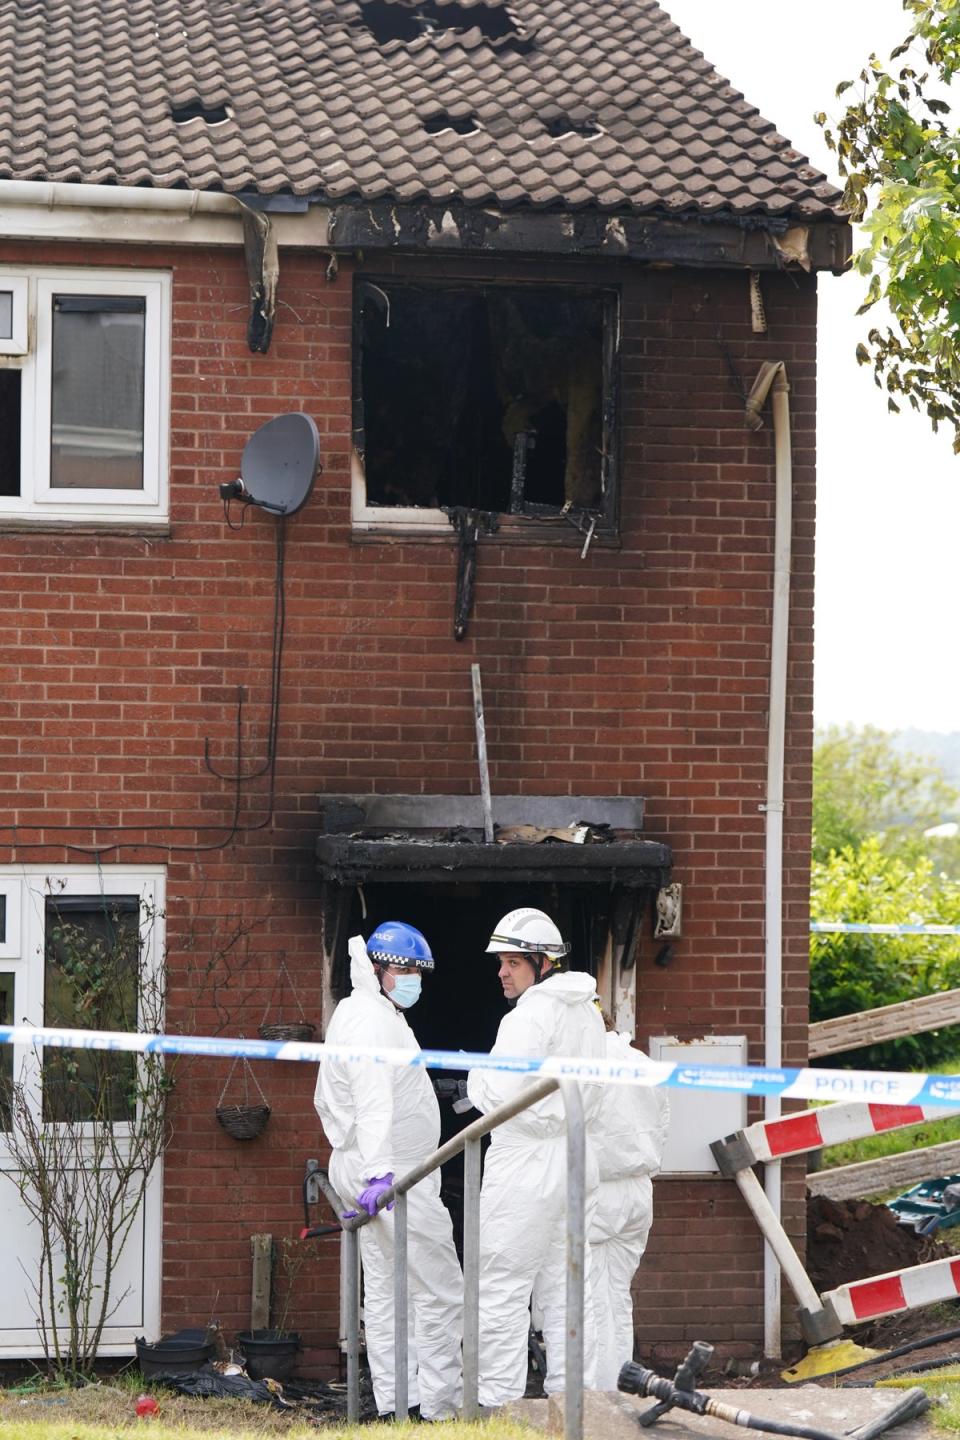 West Midlands Police said they arrested two men on suspicion of murder after the house fire (Jacob King/PA Wire)